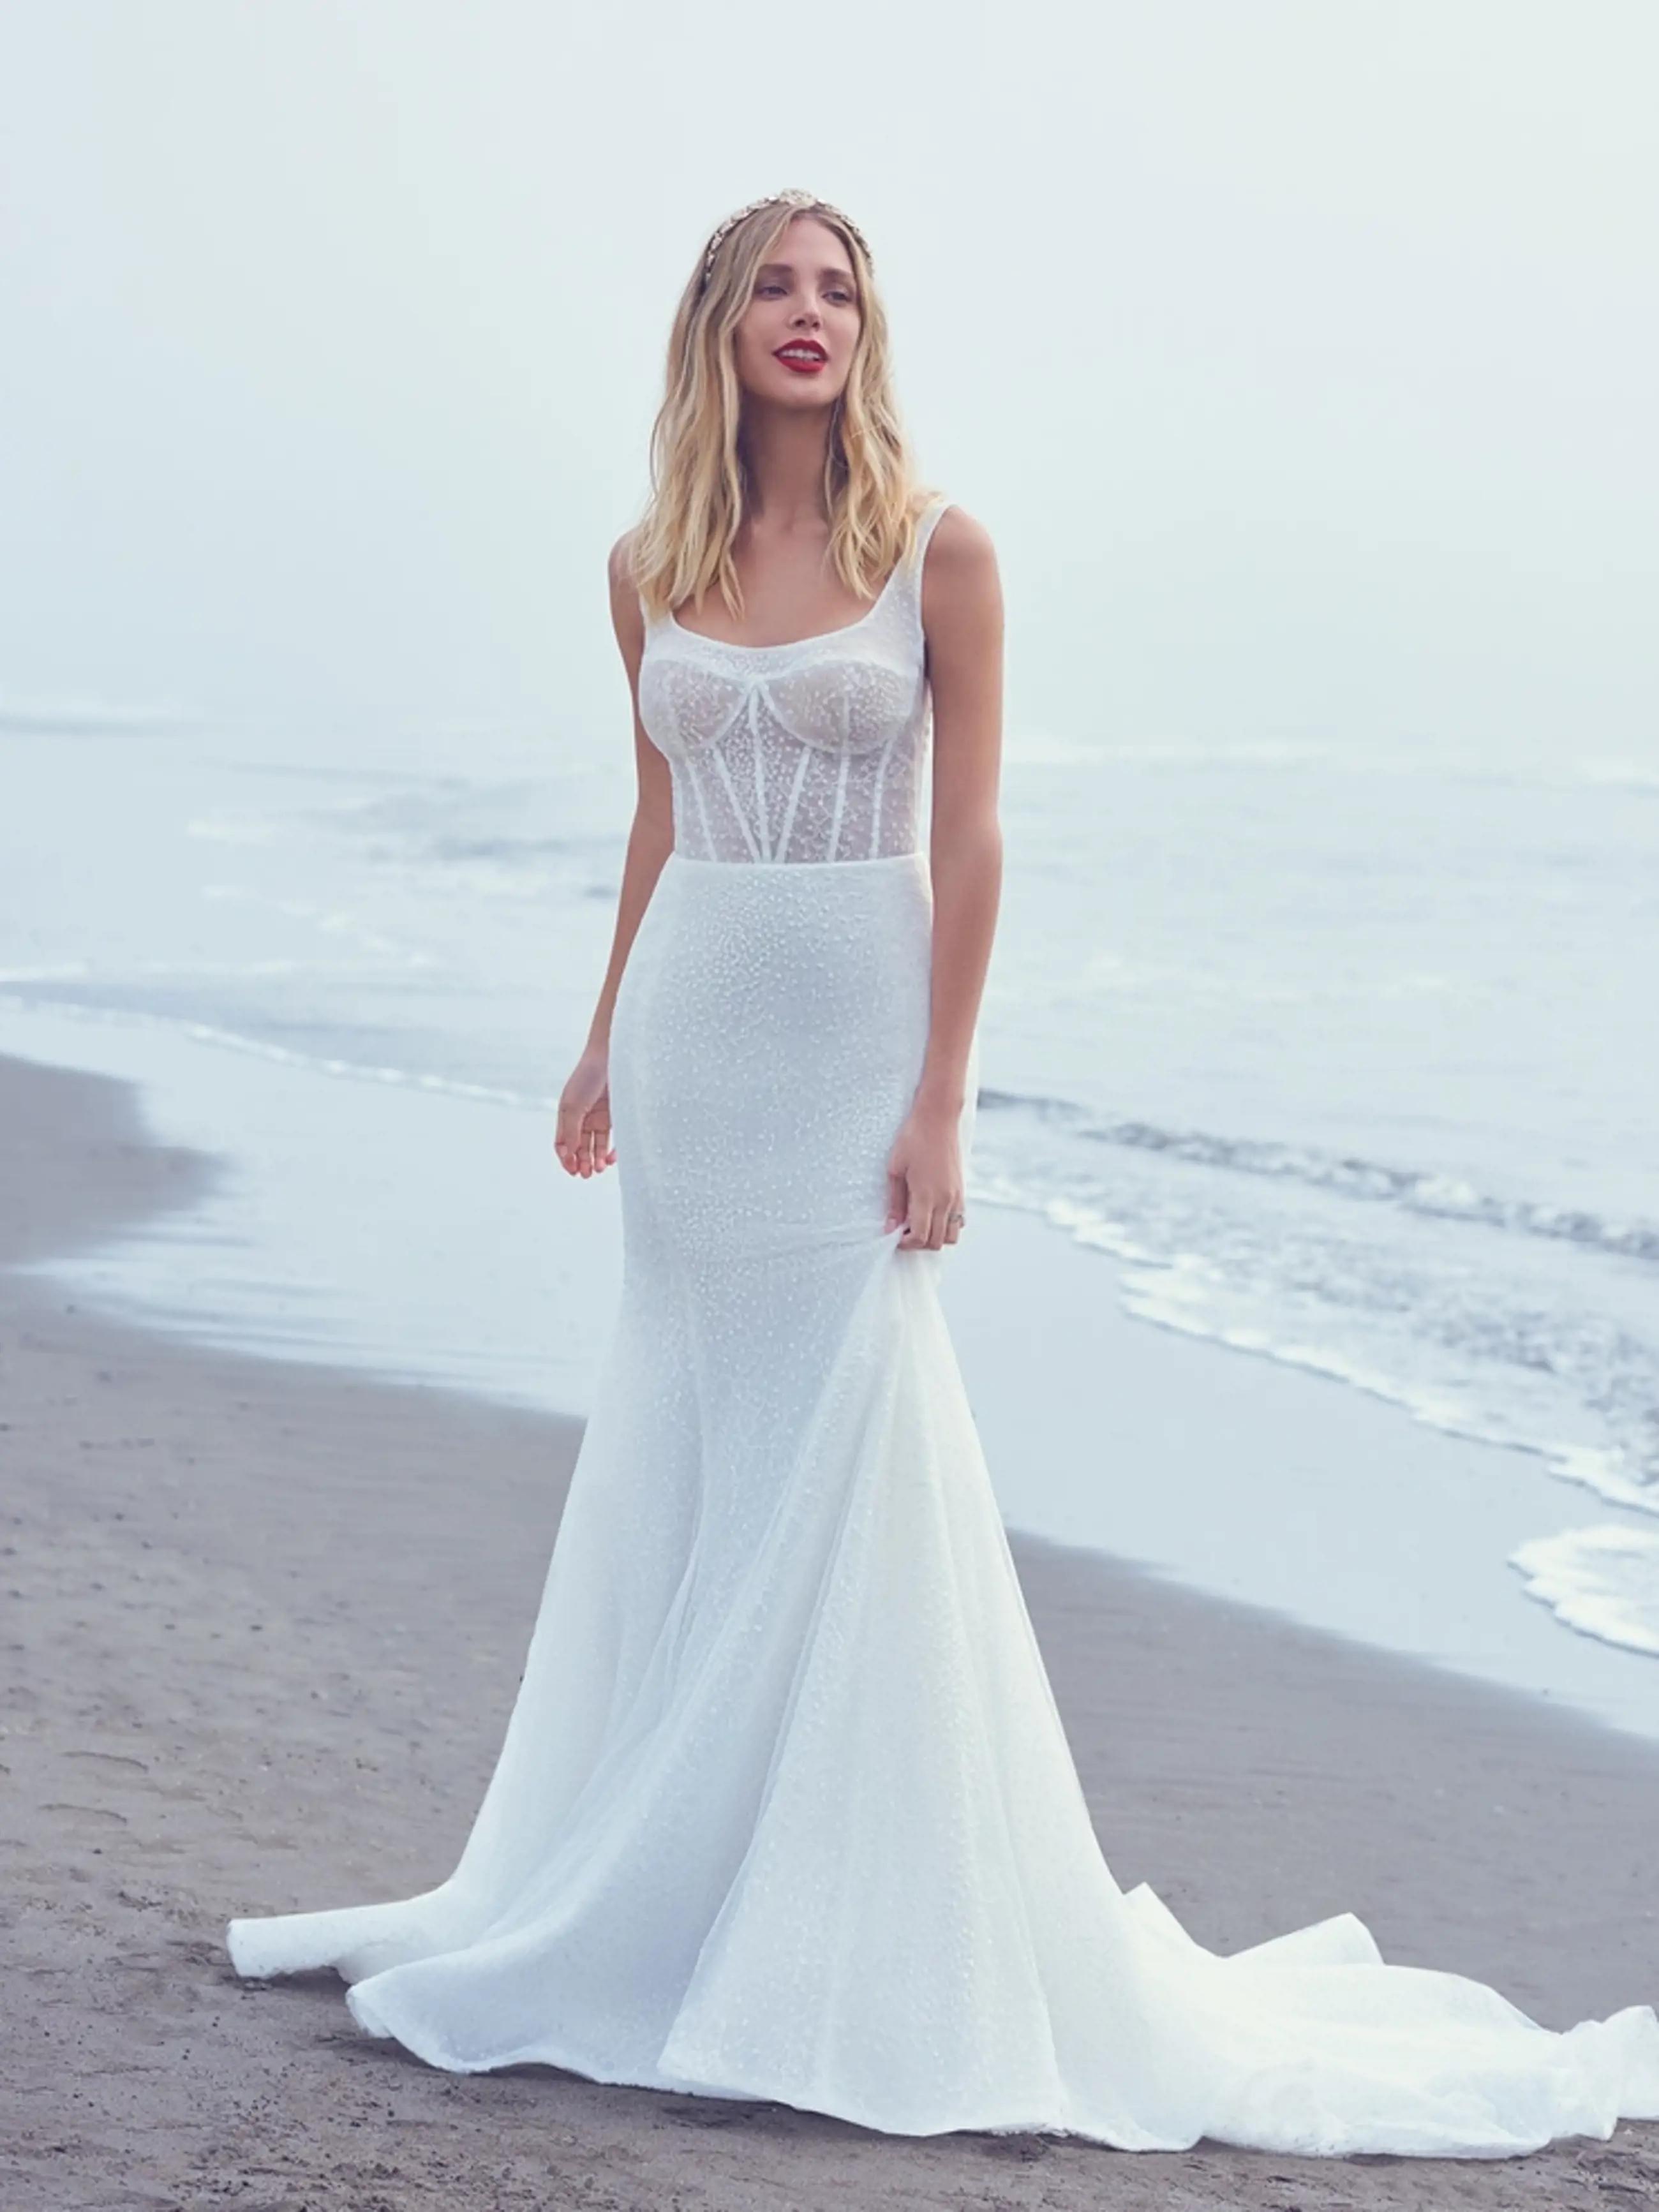 Choosing a Wedding Gown Based on Your Personality Image